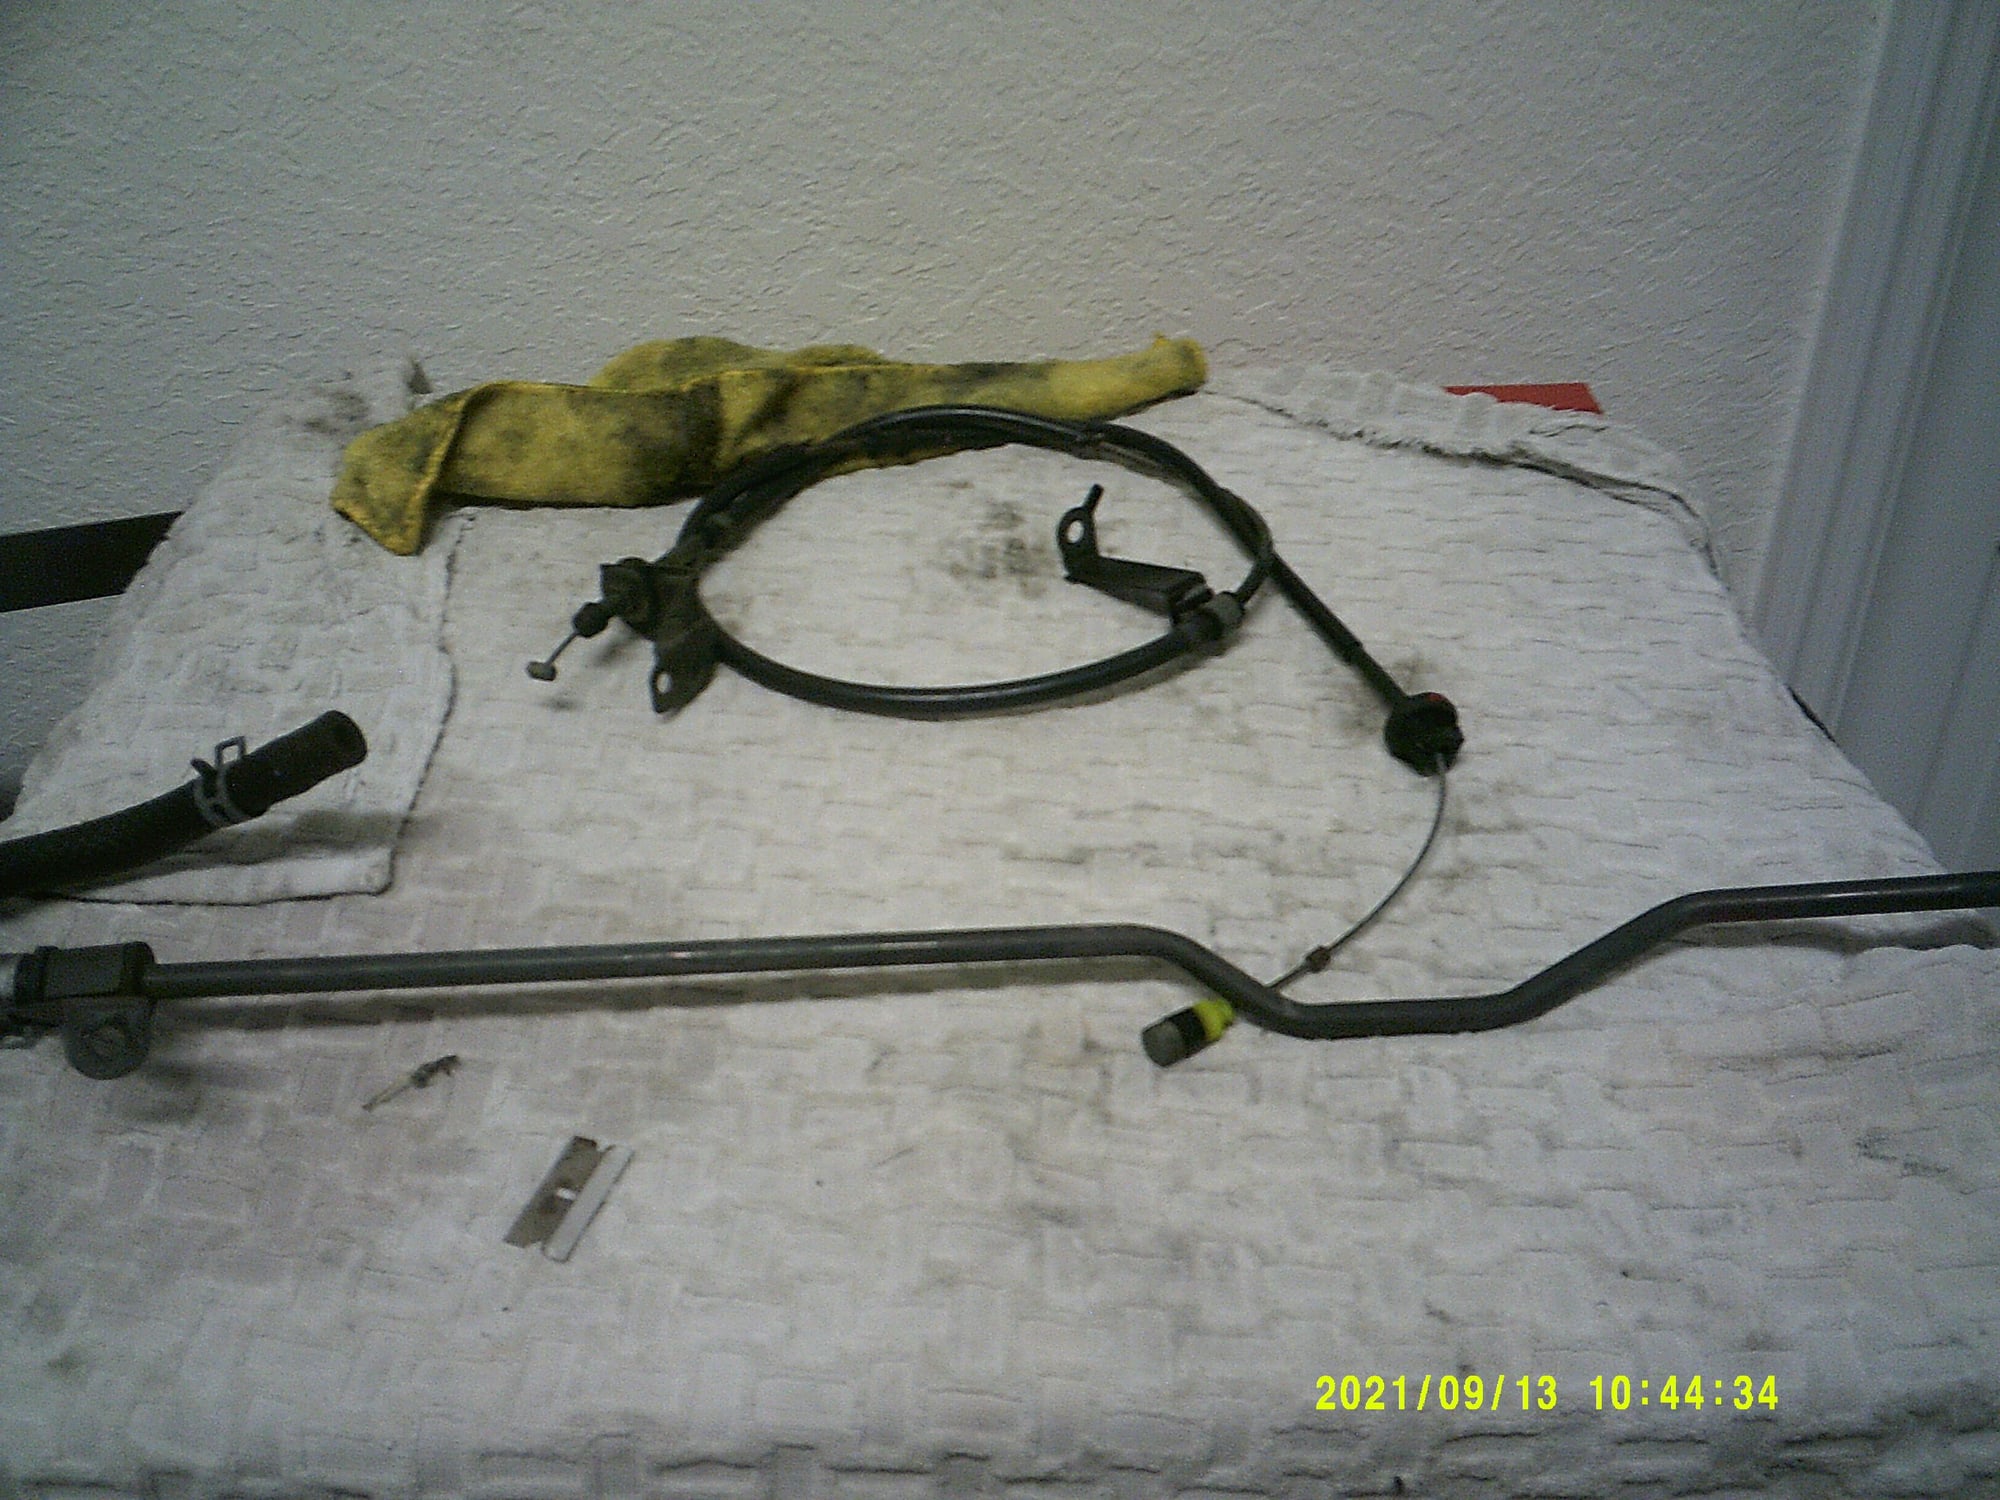 1994 Mazda RX-7 - Stock steering wheel, ECU, fuel rails and injectors, coil pack and control unit more - Miscellaneous - $175 - Punta Gorda, FL 33982, United States